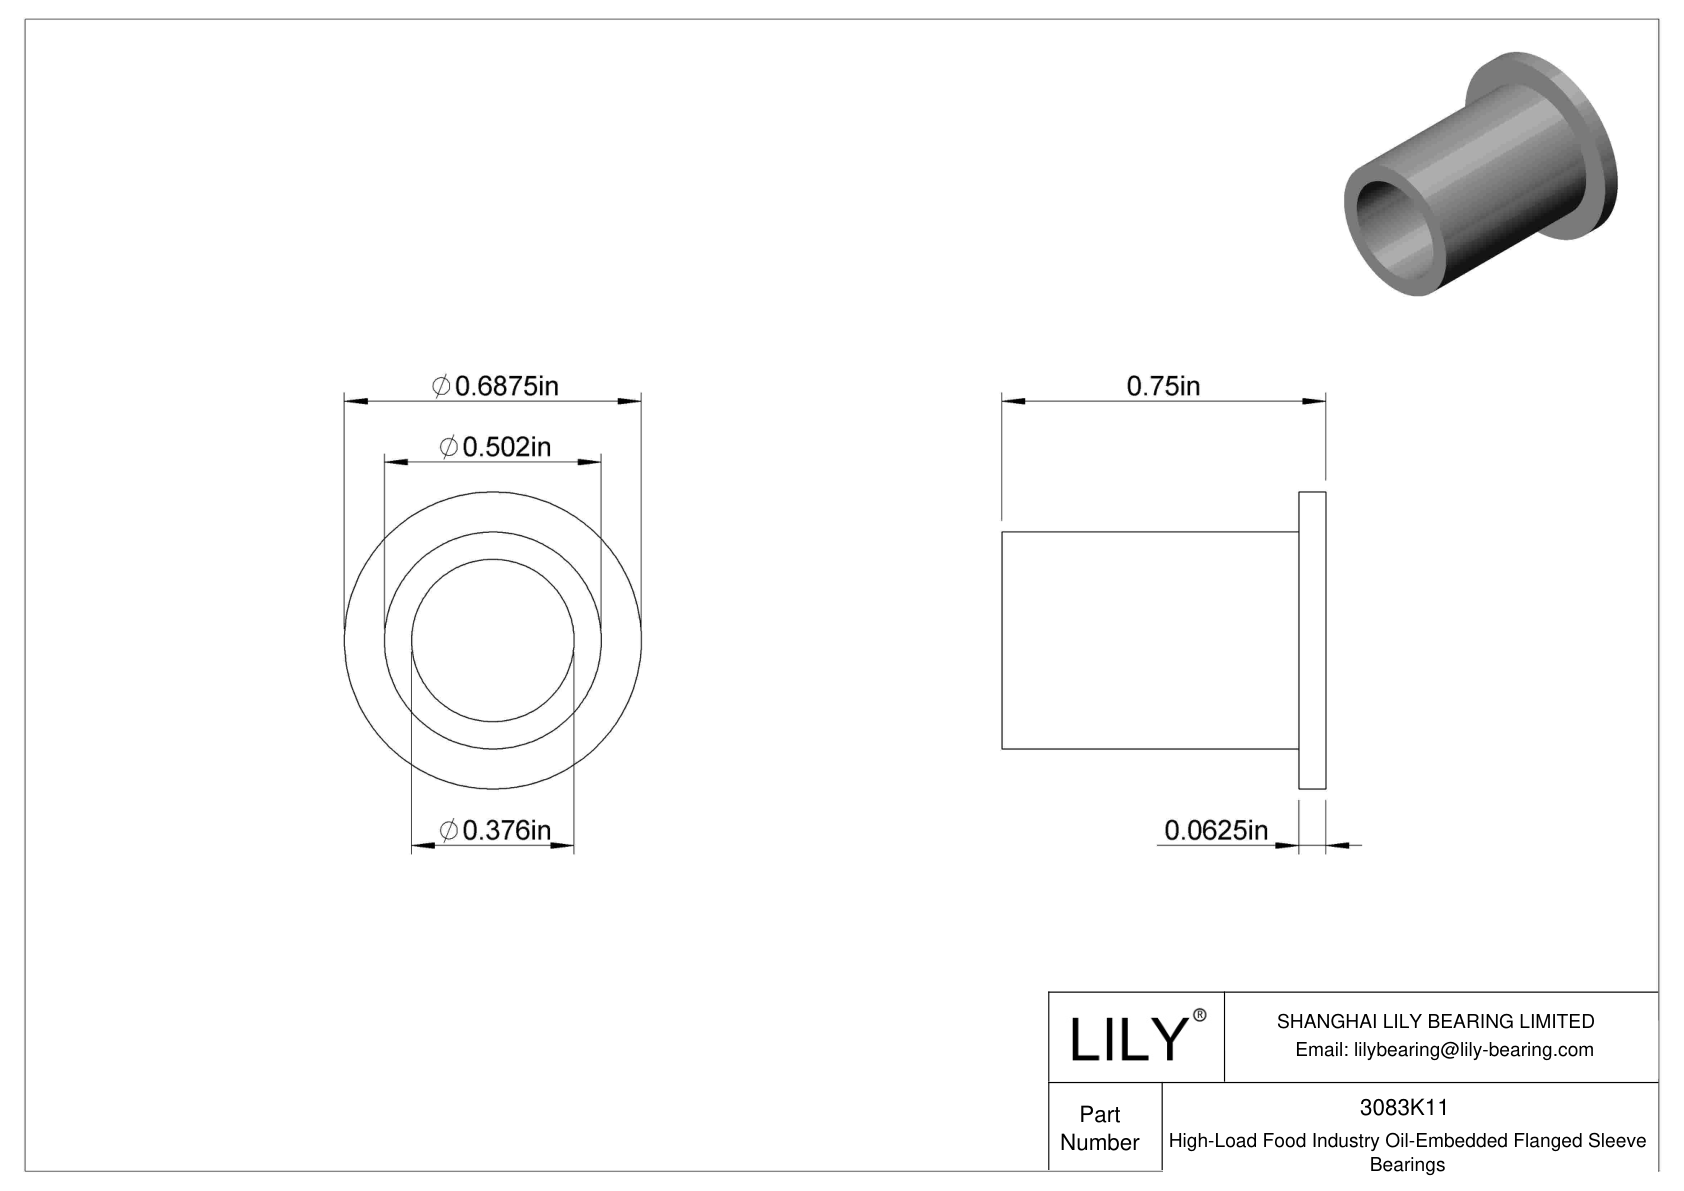 DAIDKBB High-Load Food Industry Oil-Embedded Flanged Sleeve Bearings cad drawing